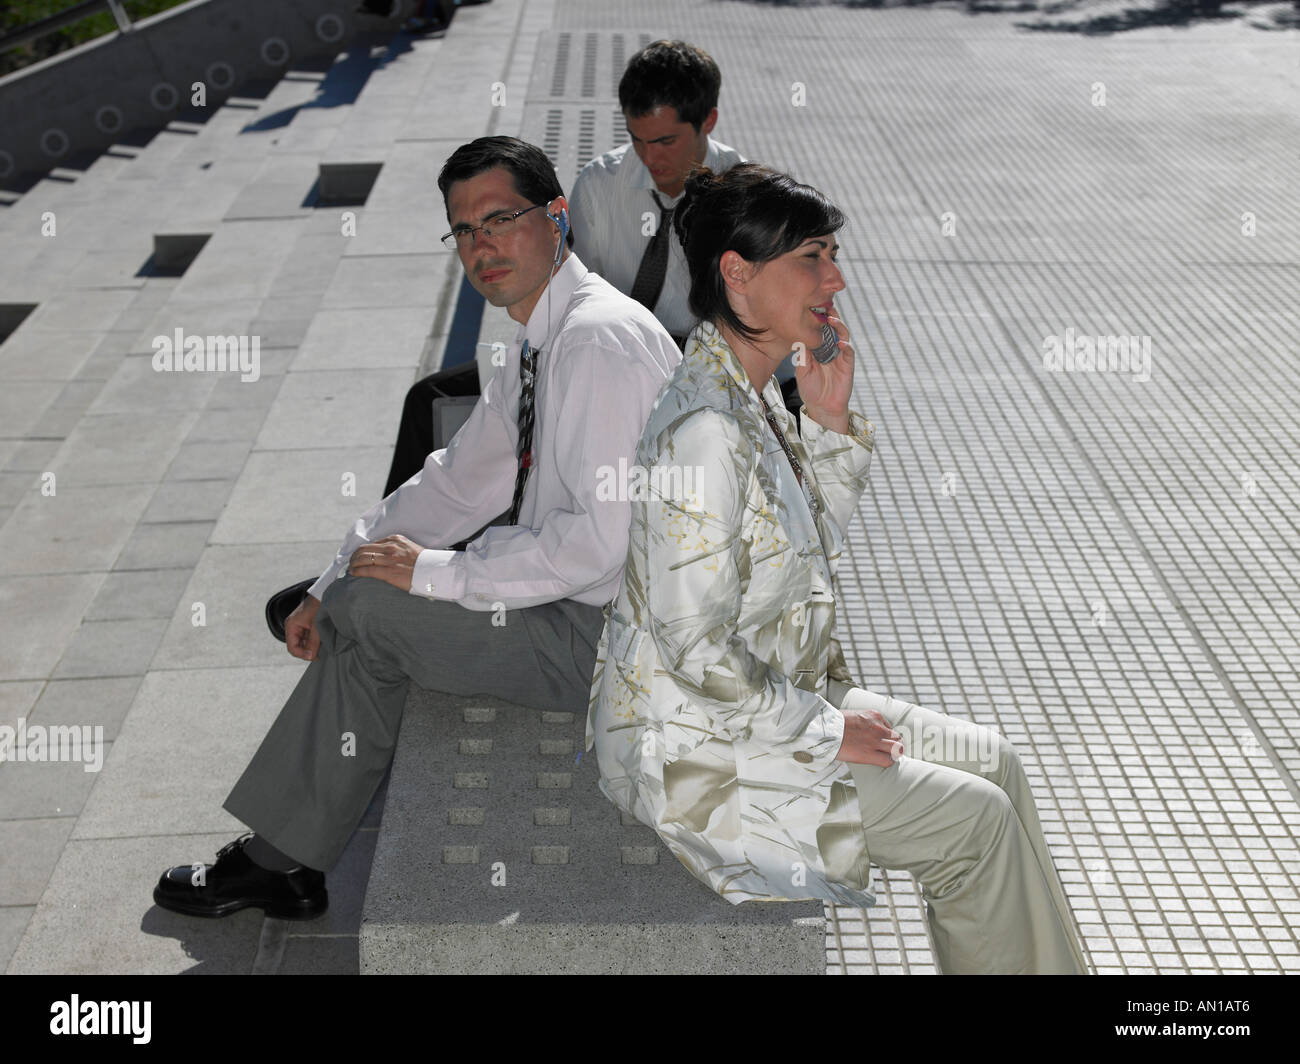 Three people sitting on a stone bench Stock Photo